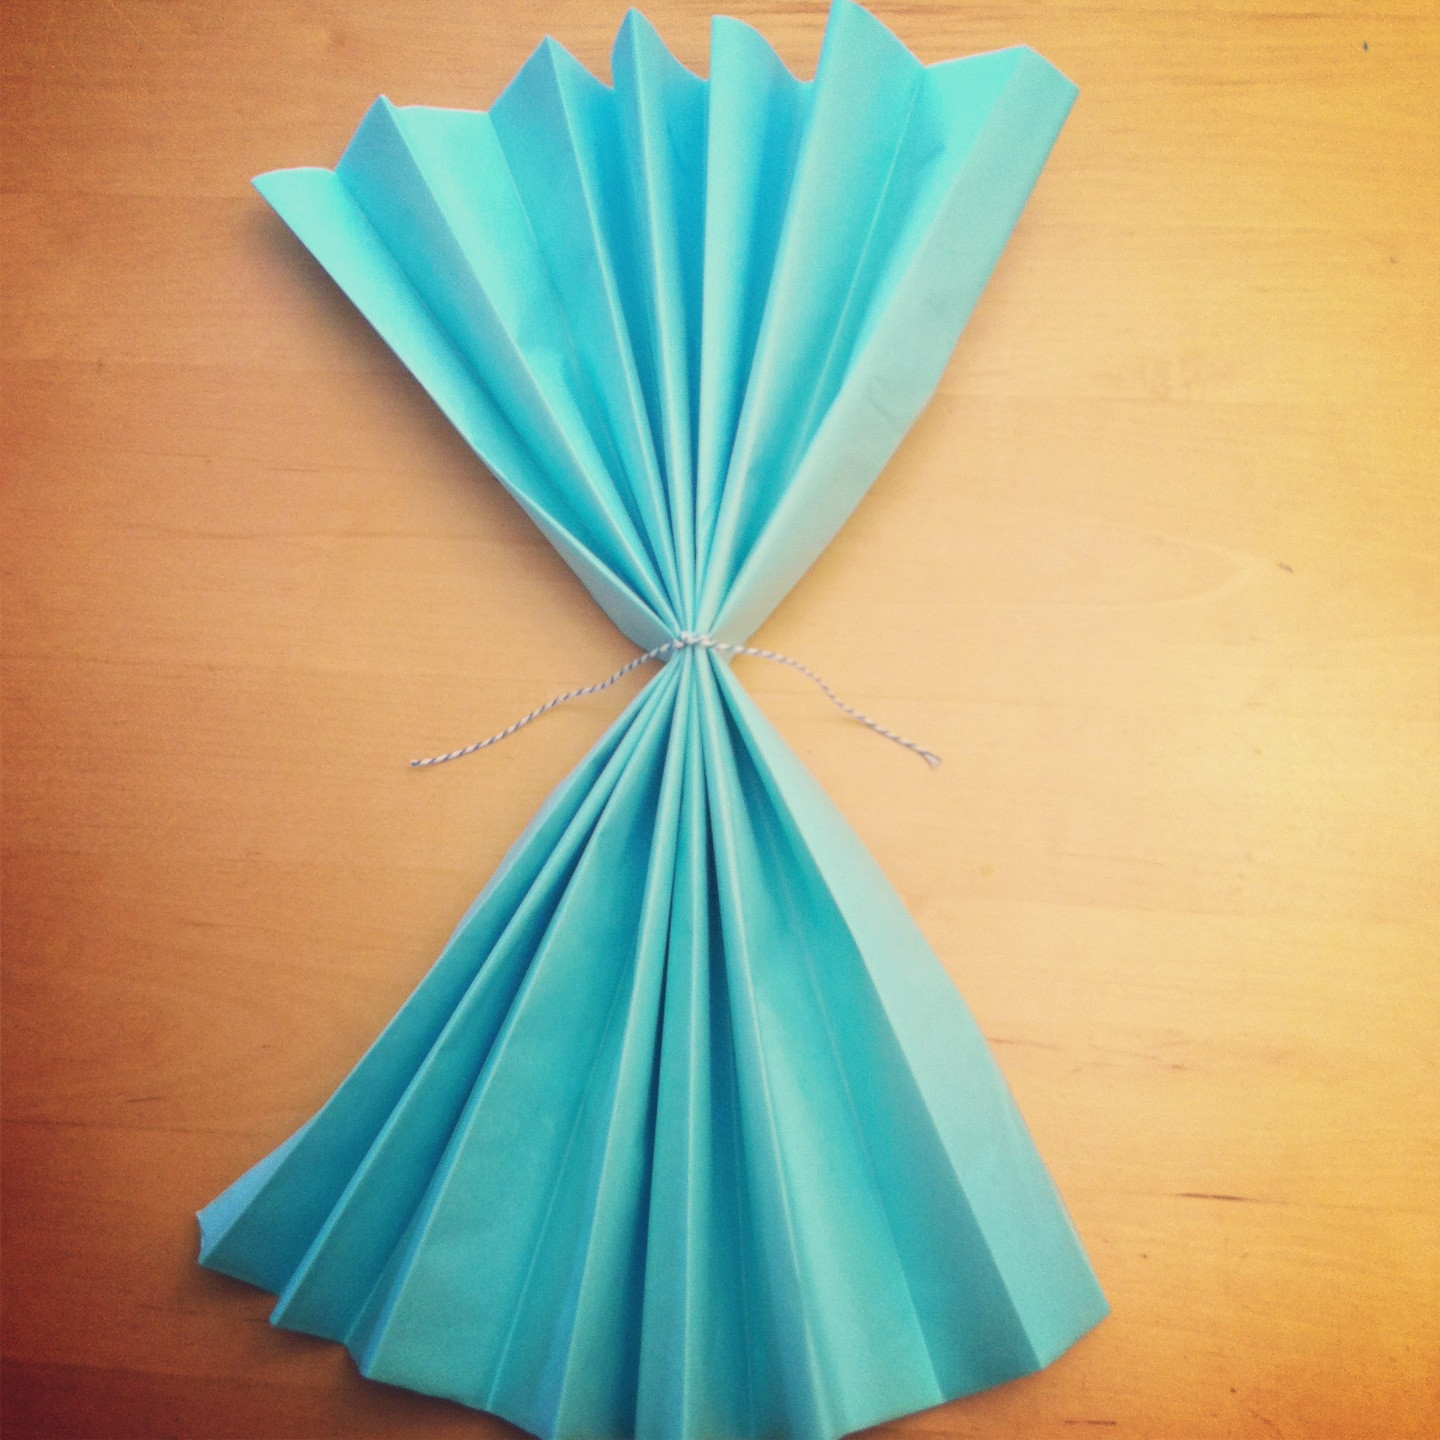 DIY Paper Party Decorations
 Tutorial How To Make DIY Giant Tissue Paper Flowers